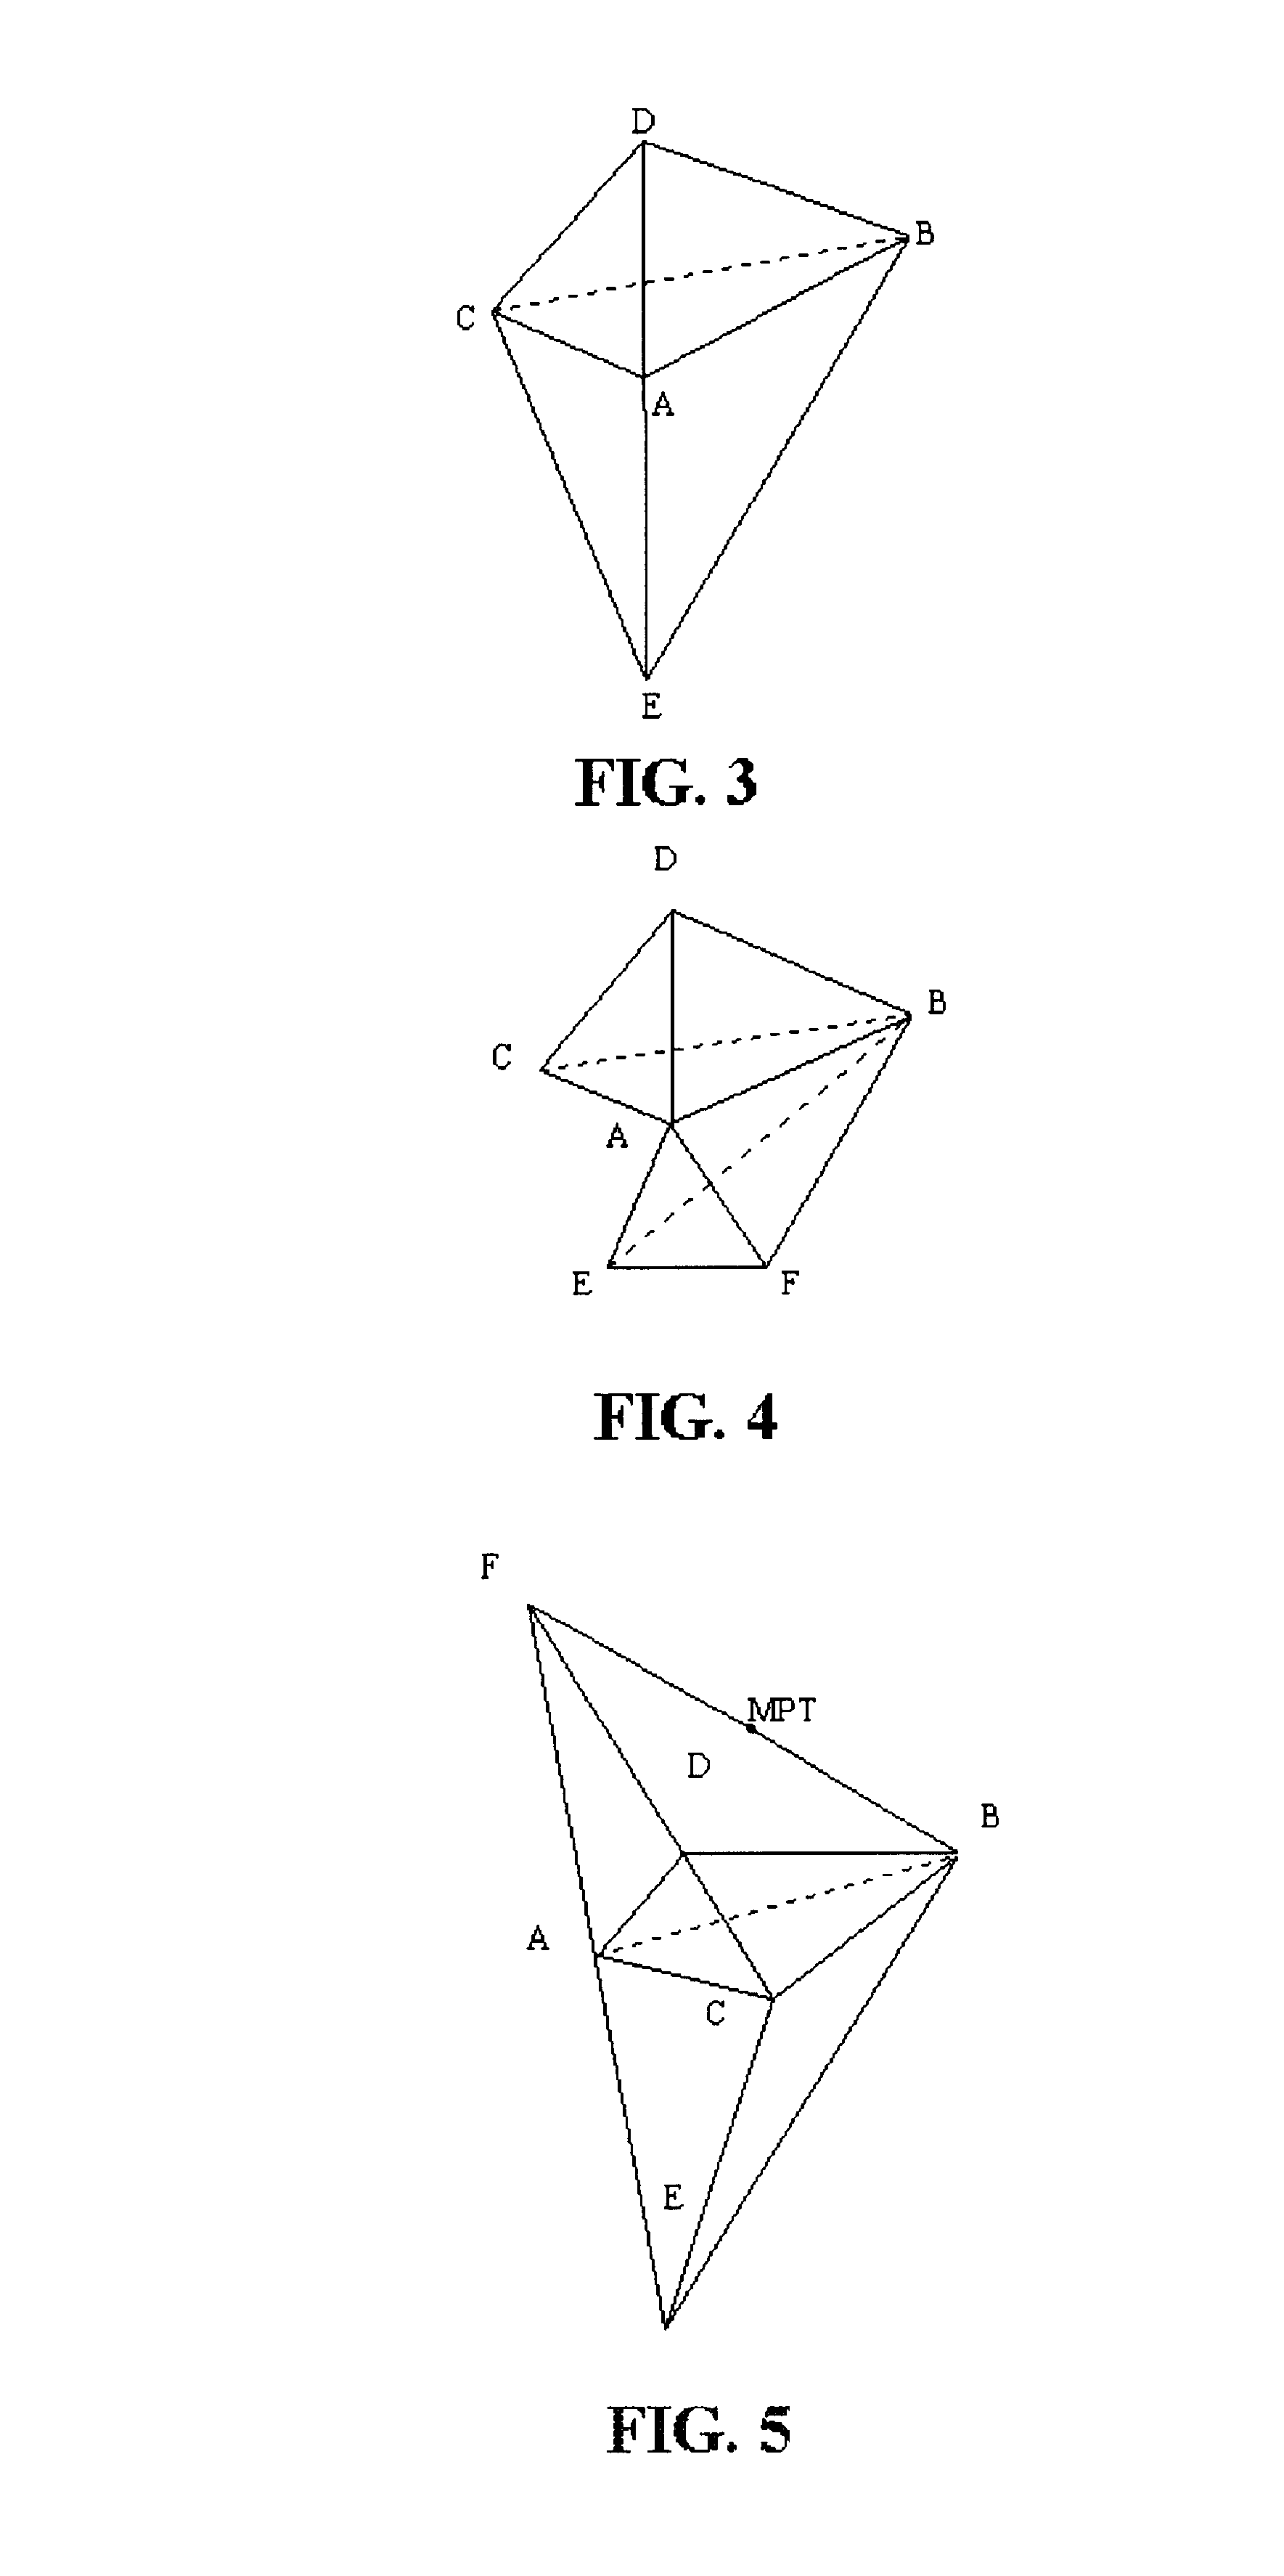 Longest-edge refinement and derefinement system and method for automatic mesh generation